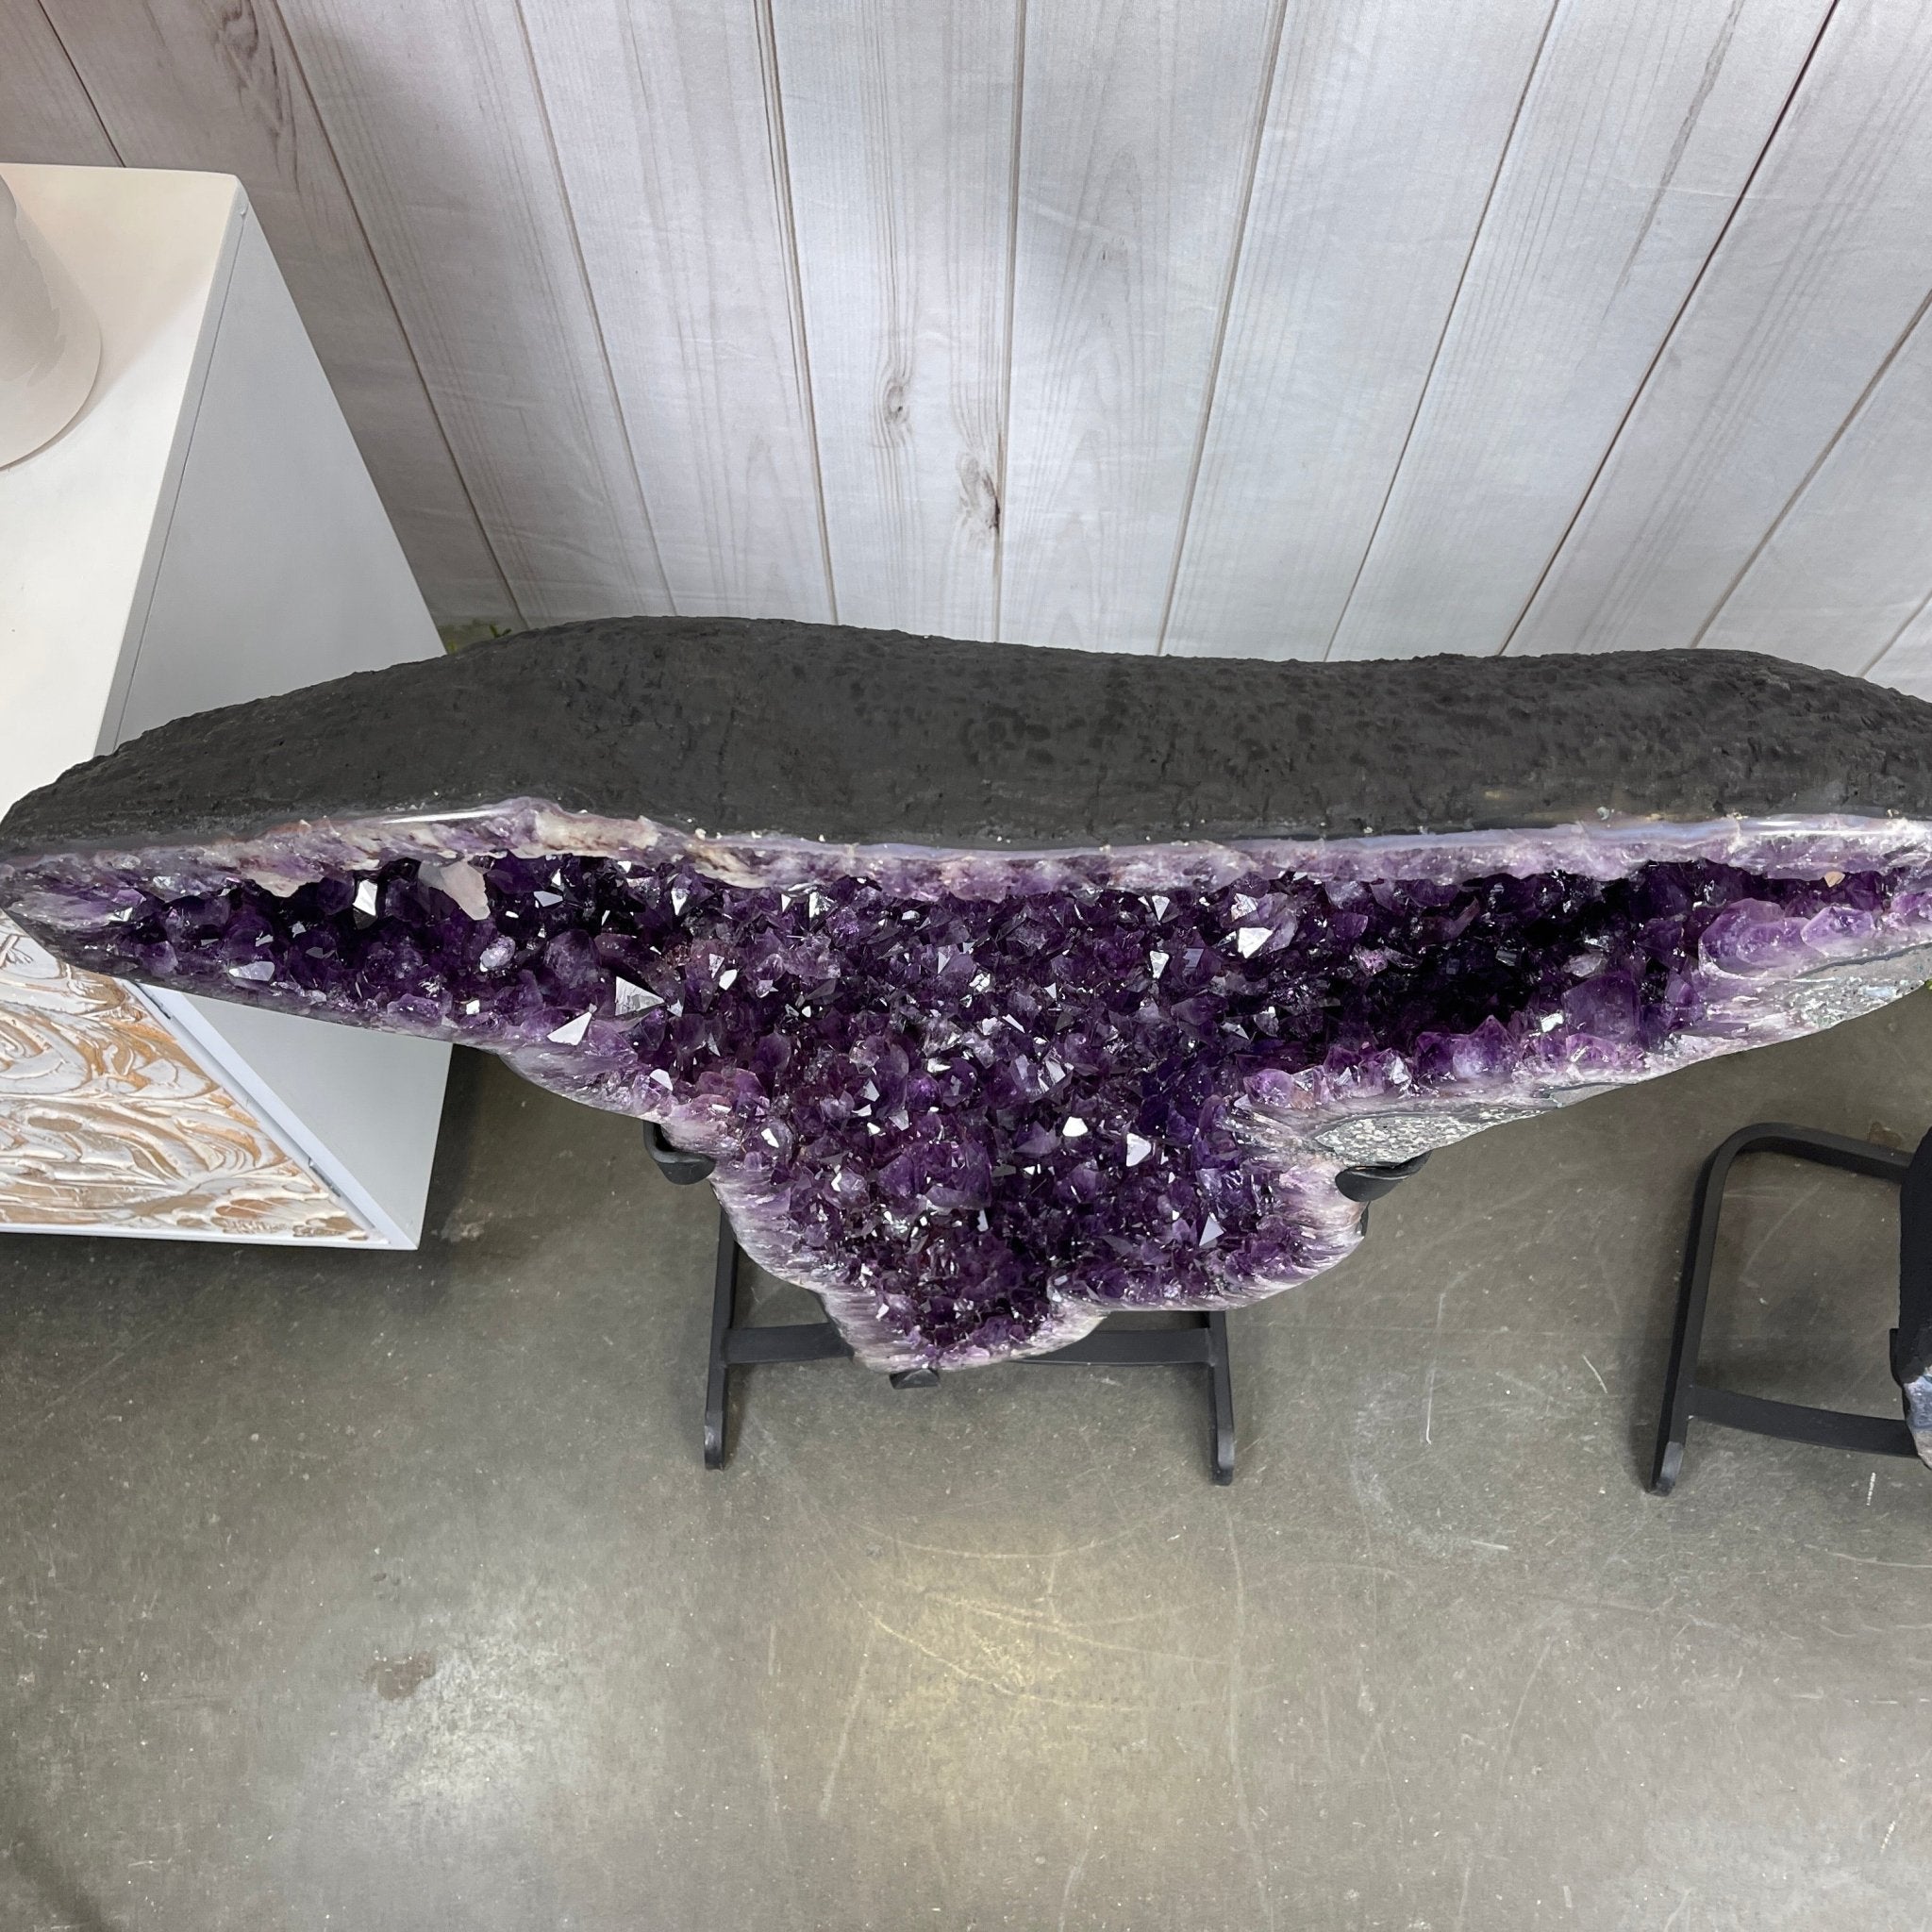 Large Extra Plus Quality Amethyst Clusters on Metal Stand, 37.4" tall #5491 by Brazil Gems - Brazil GemsBrazil GemsLarge Extra Plus Quality Amethyst Clusters on Metal Stand, 37.4" tall #5491 by Brazil GemsClusters on Fixed Bases5491-0036